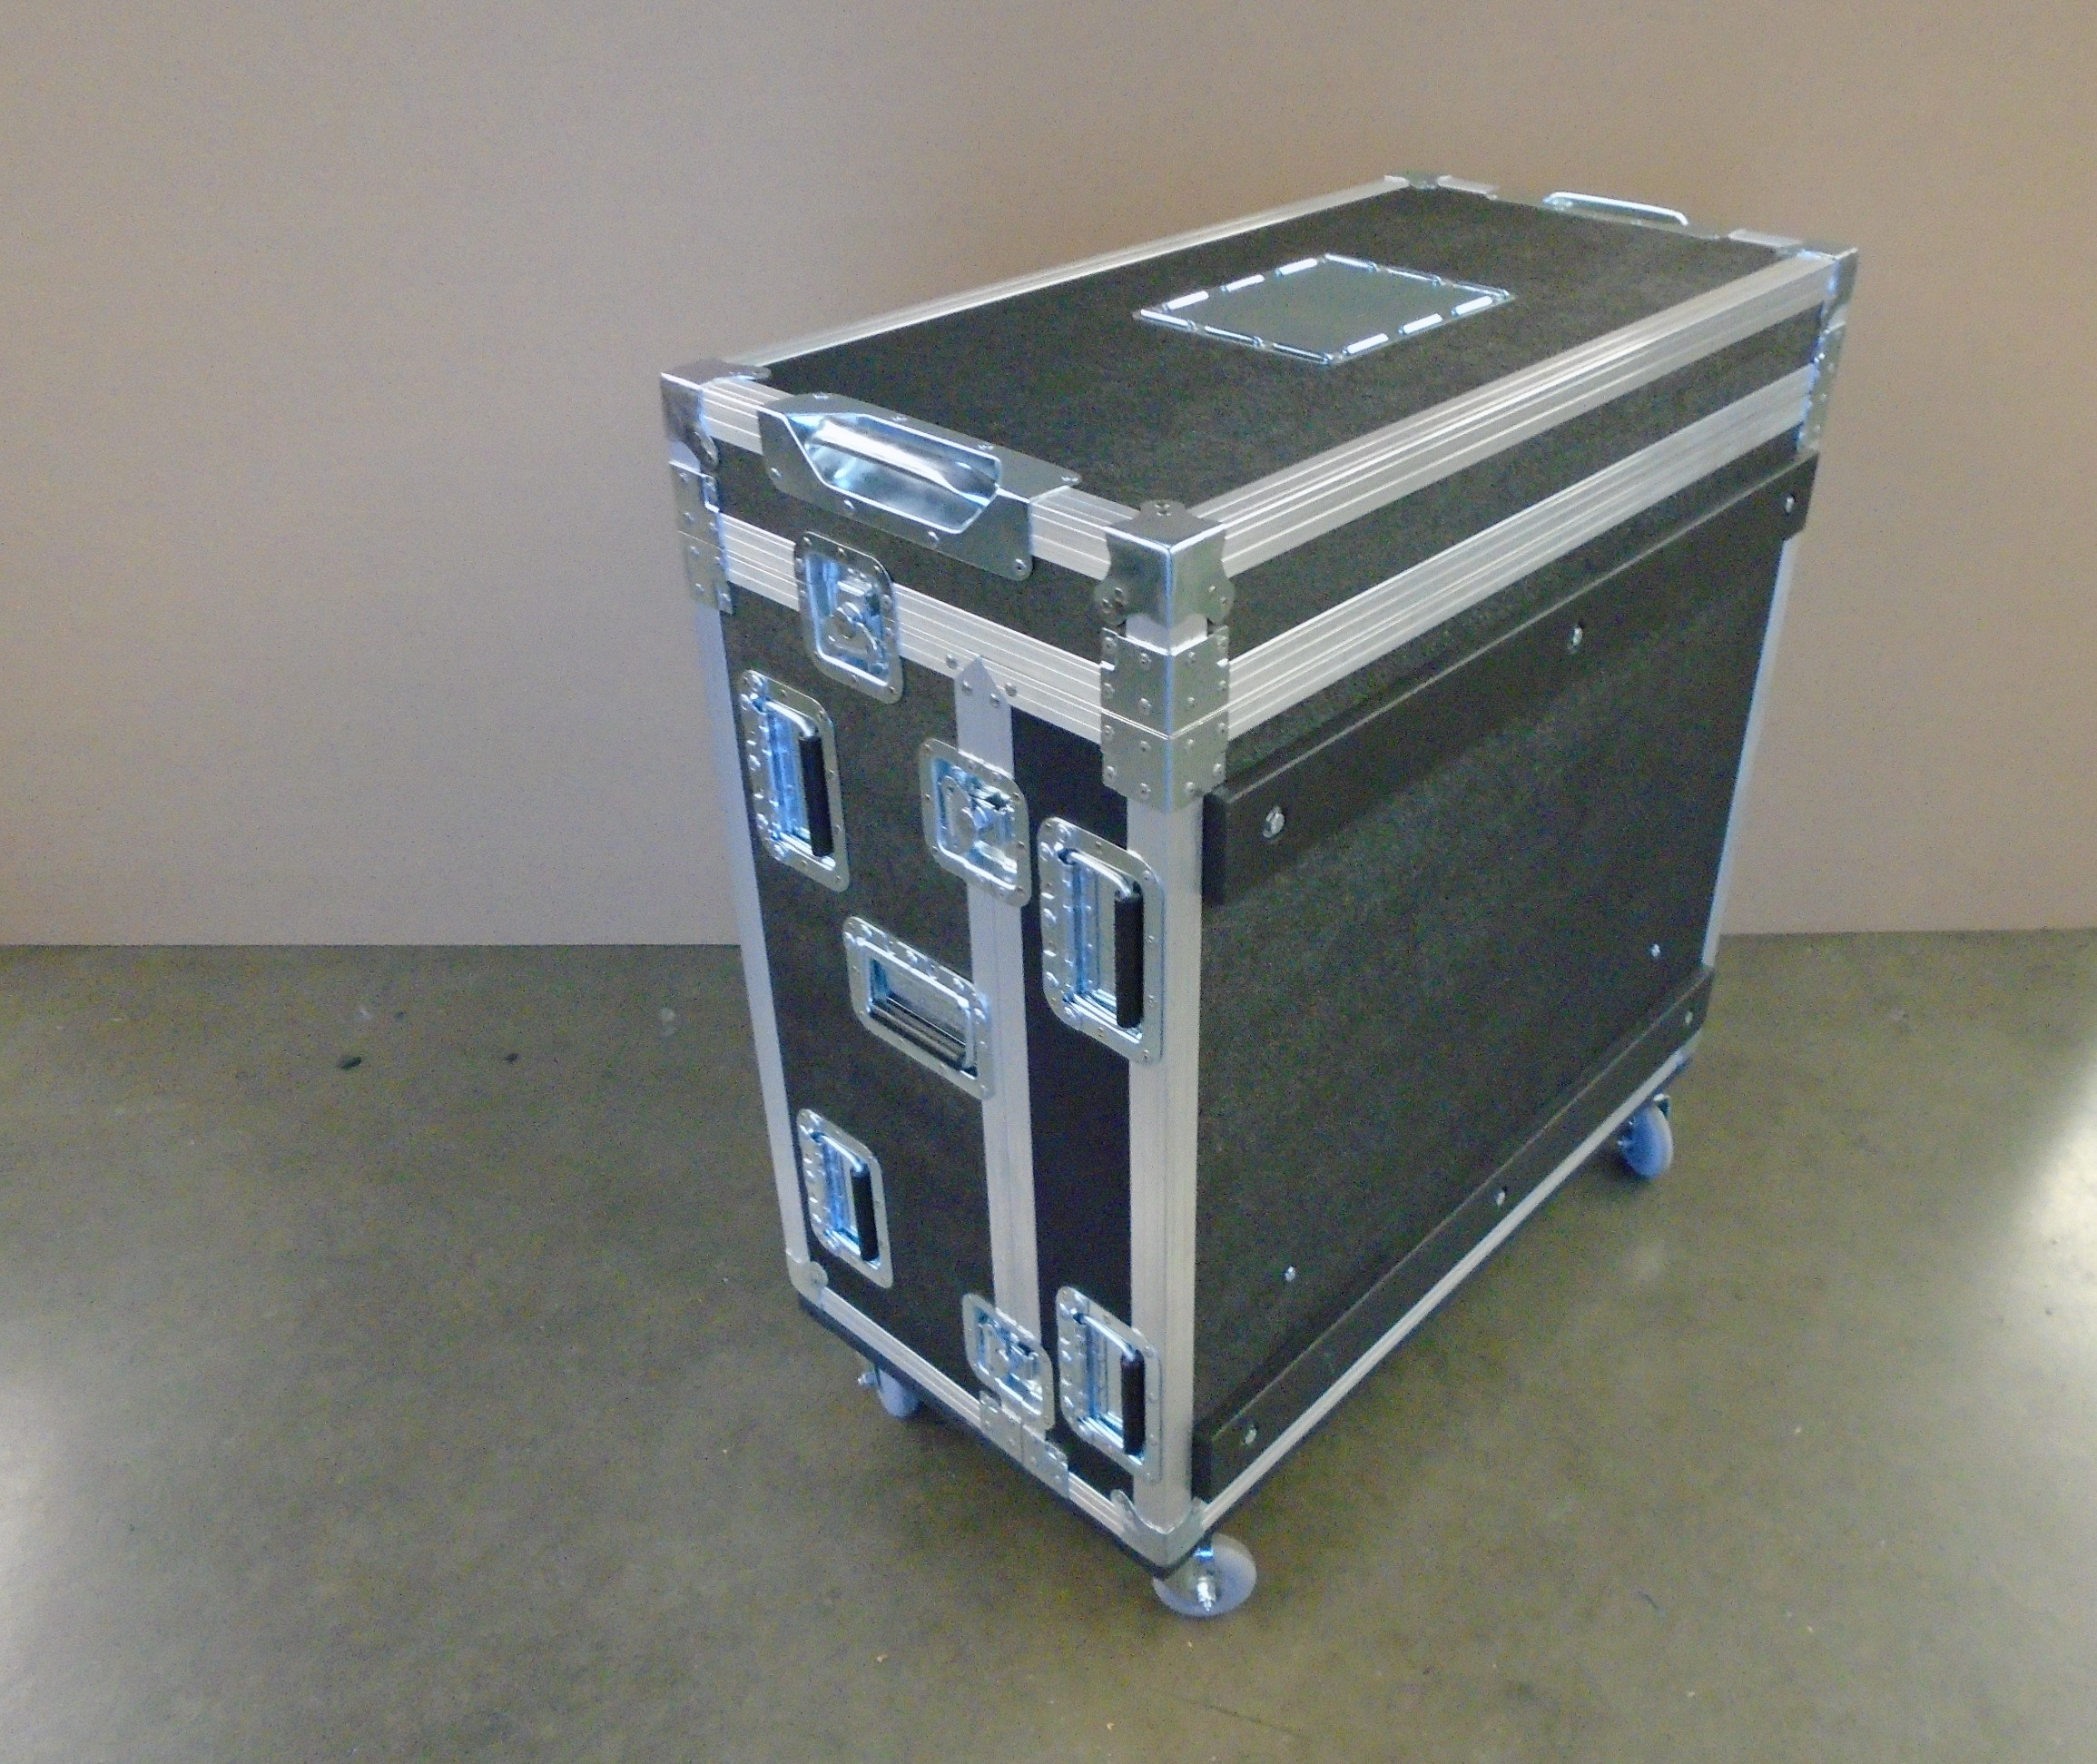 Print # 8111 - Custom Road Case for Allen & Heath dLive C2500 Control Surface with 8" Dog House By Nelson Case Corp